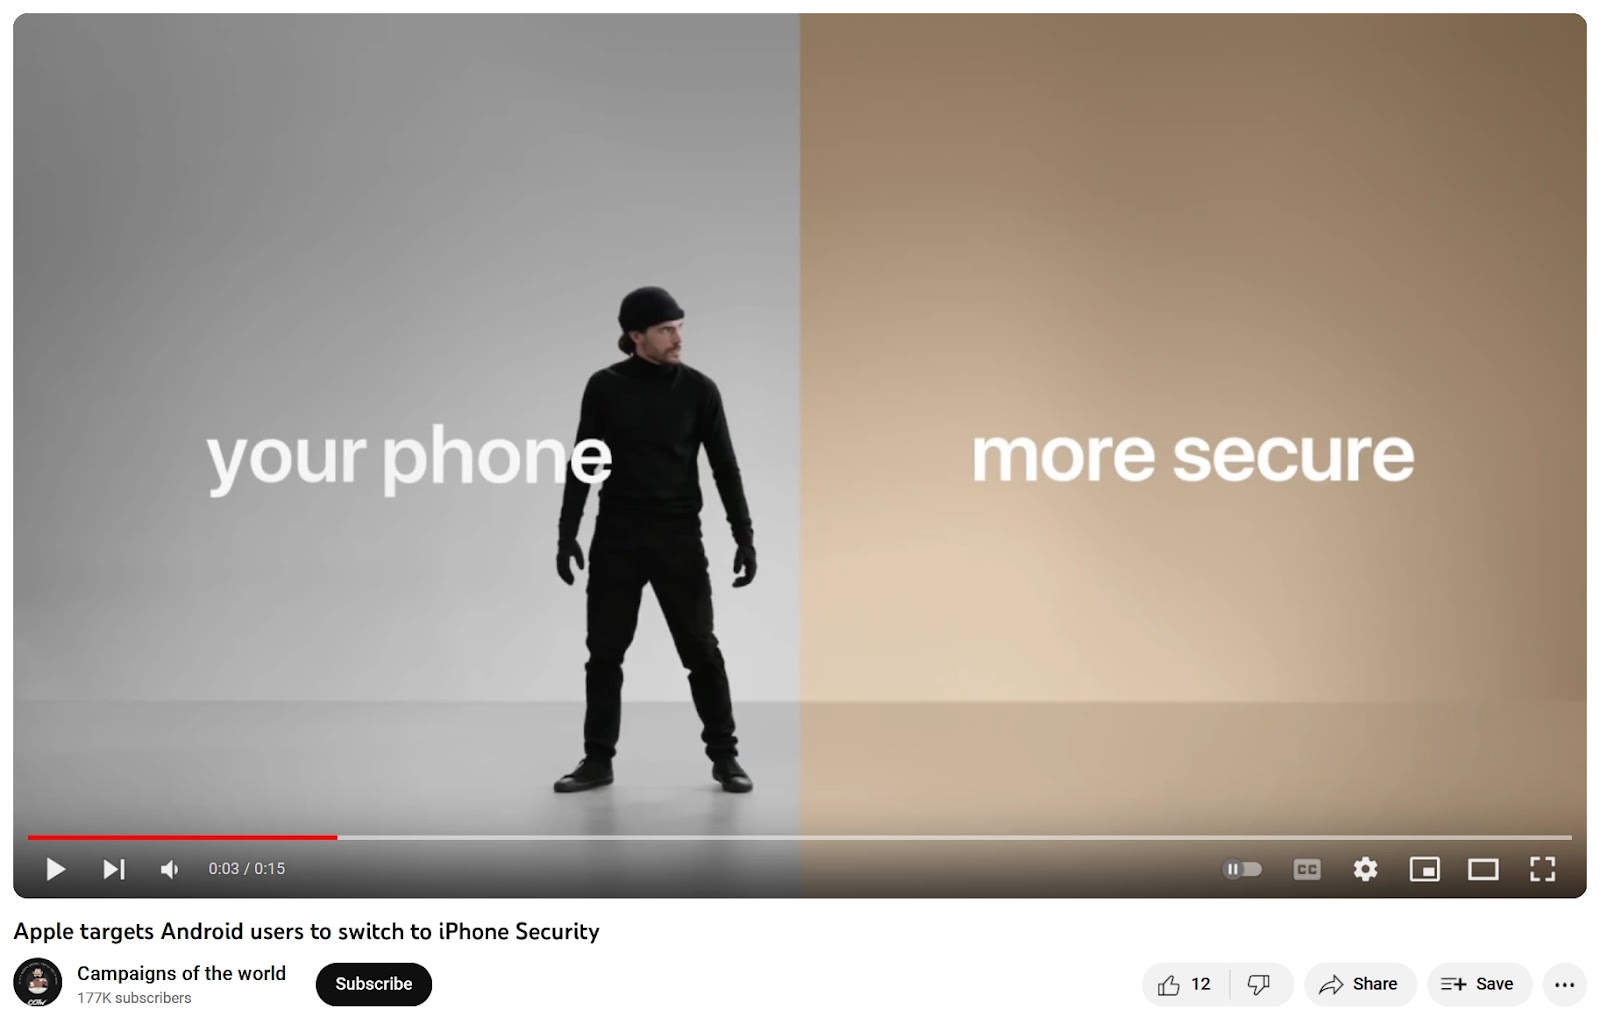 "Apple targets Android users to switch to iPhone Security" YouTube